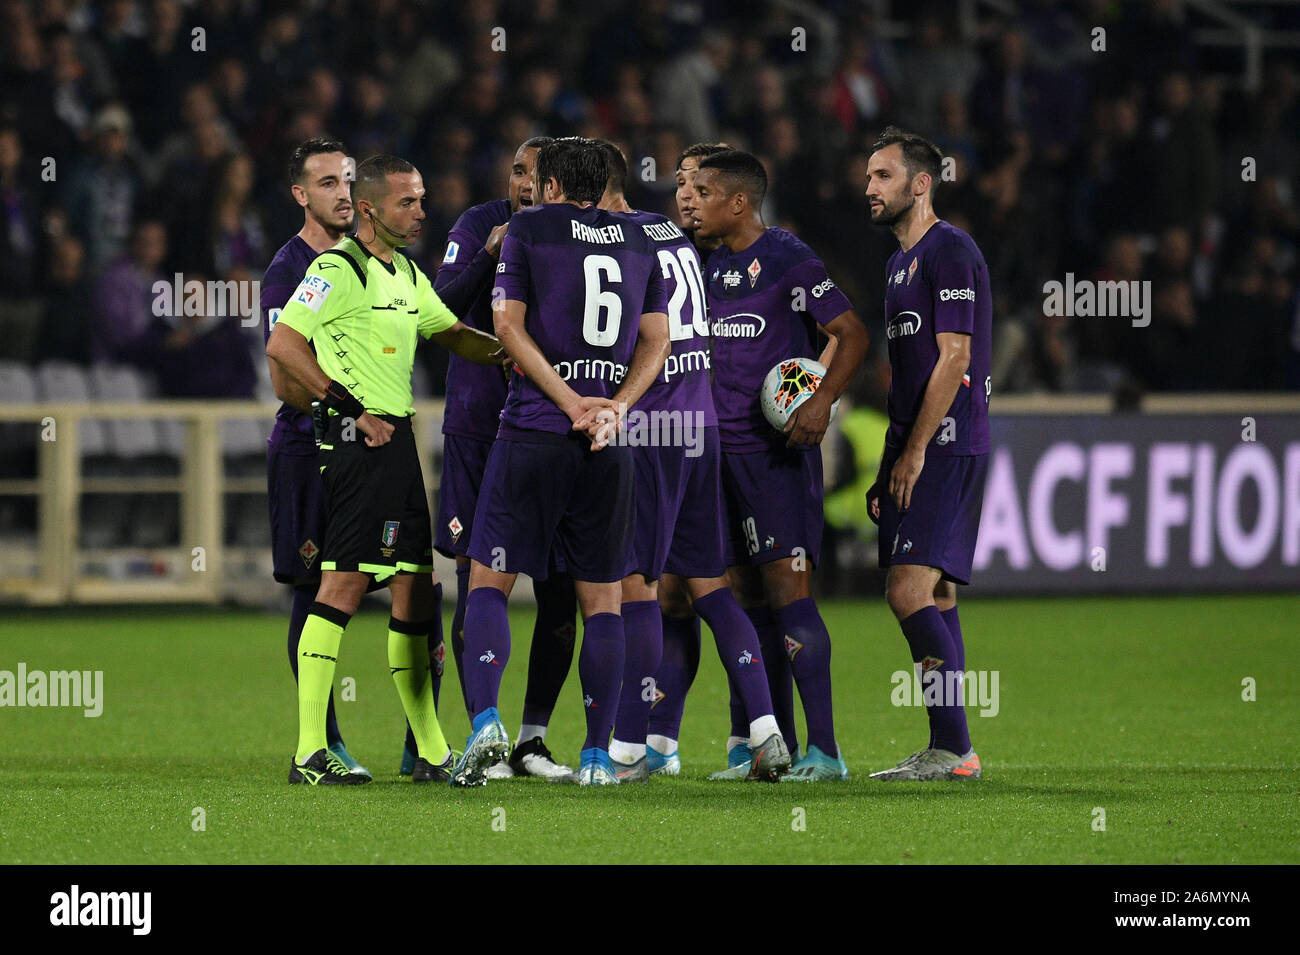 Firenze, Italy. 27th Oct, 2019. le proteste of fiorentina after the goal of immobileduring, Italian Soccer Serie A Men Championship in Firenze, Italy, October 27 2019 - LPS/Matteo Papini Credit: Matteo Papini/LPS/ZUMA Wire/Alamy Live News Stock Photo